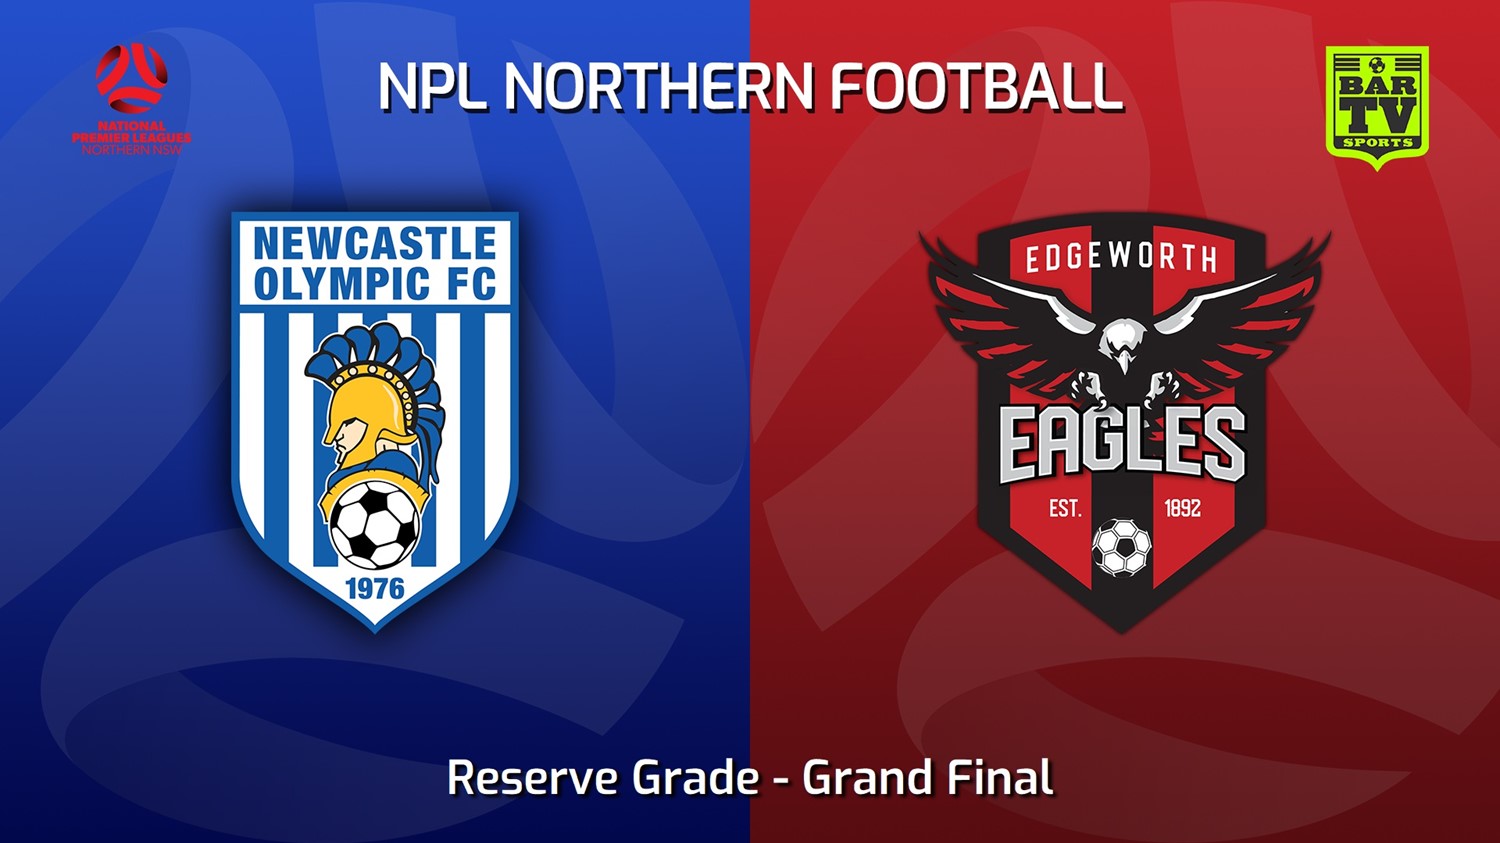 230909-NNSW NPLM Res Grand Final - Newcastle Olympic Res v Edgeworth Eagles Res Minigame Slate Image